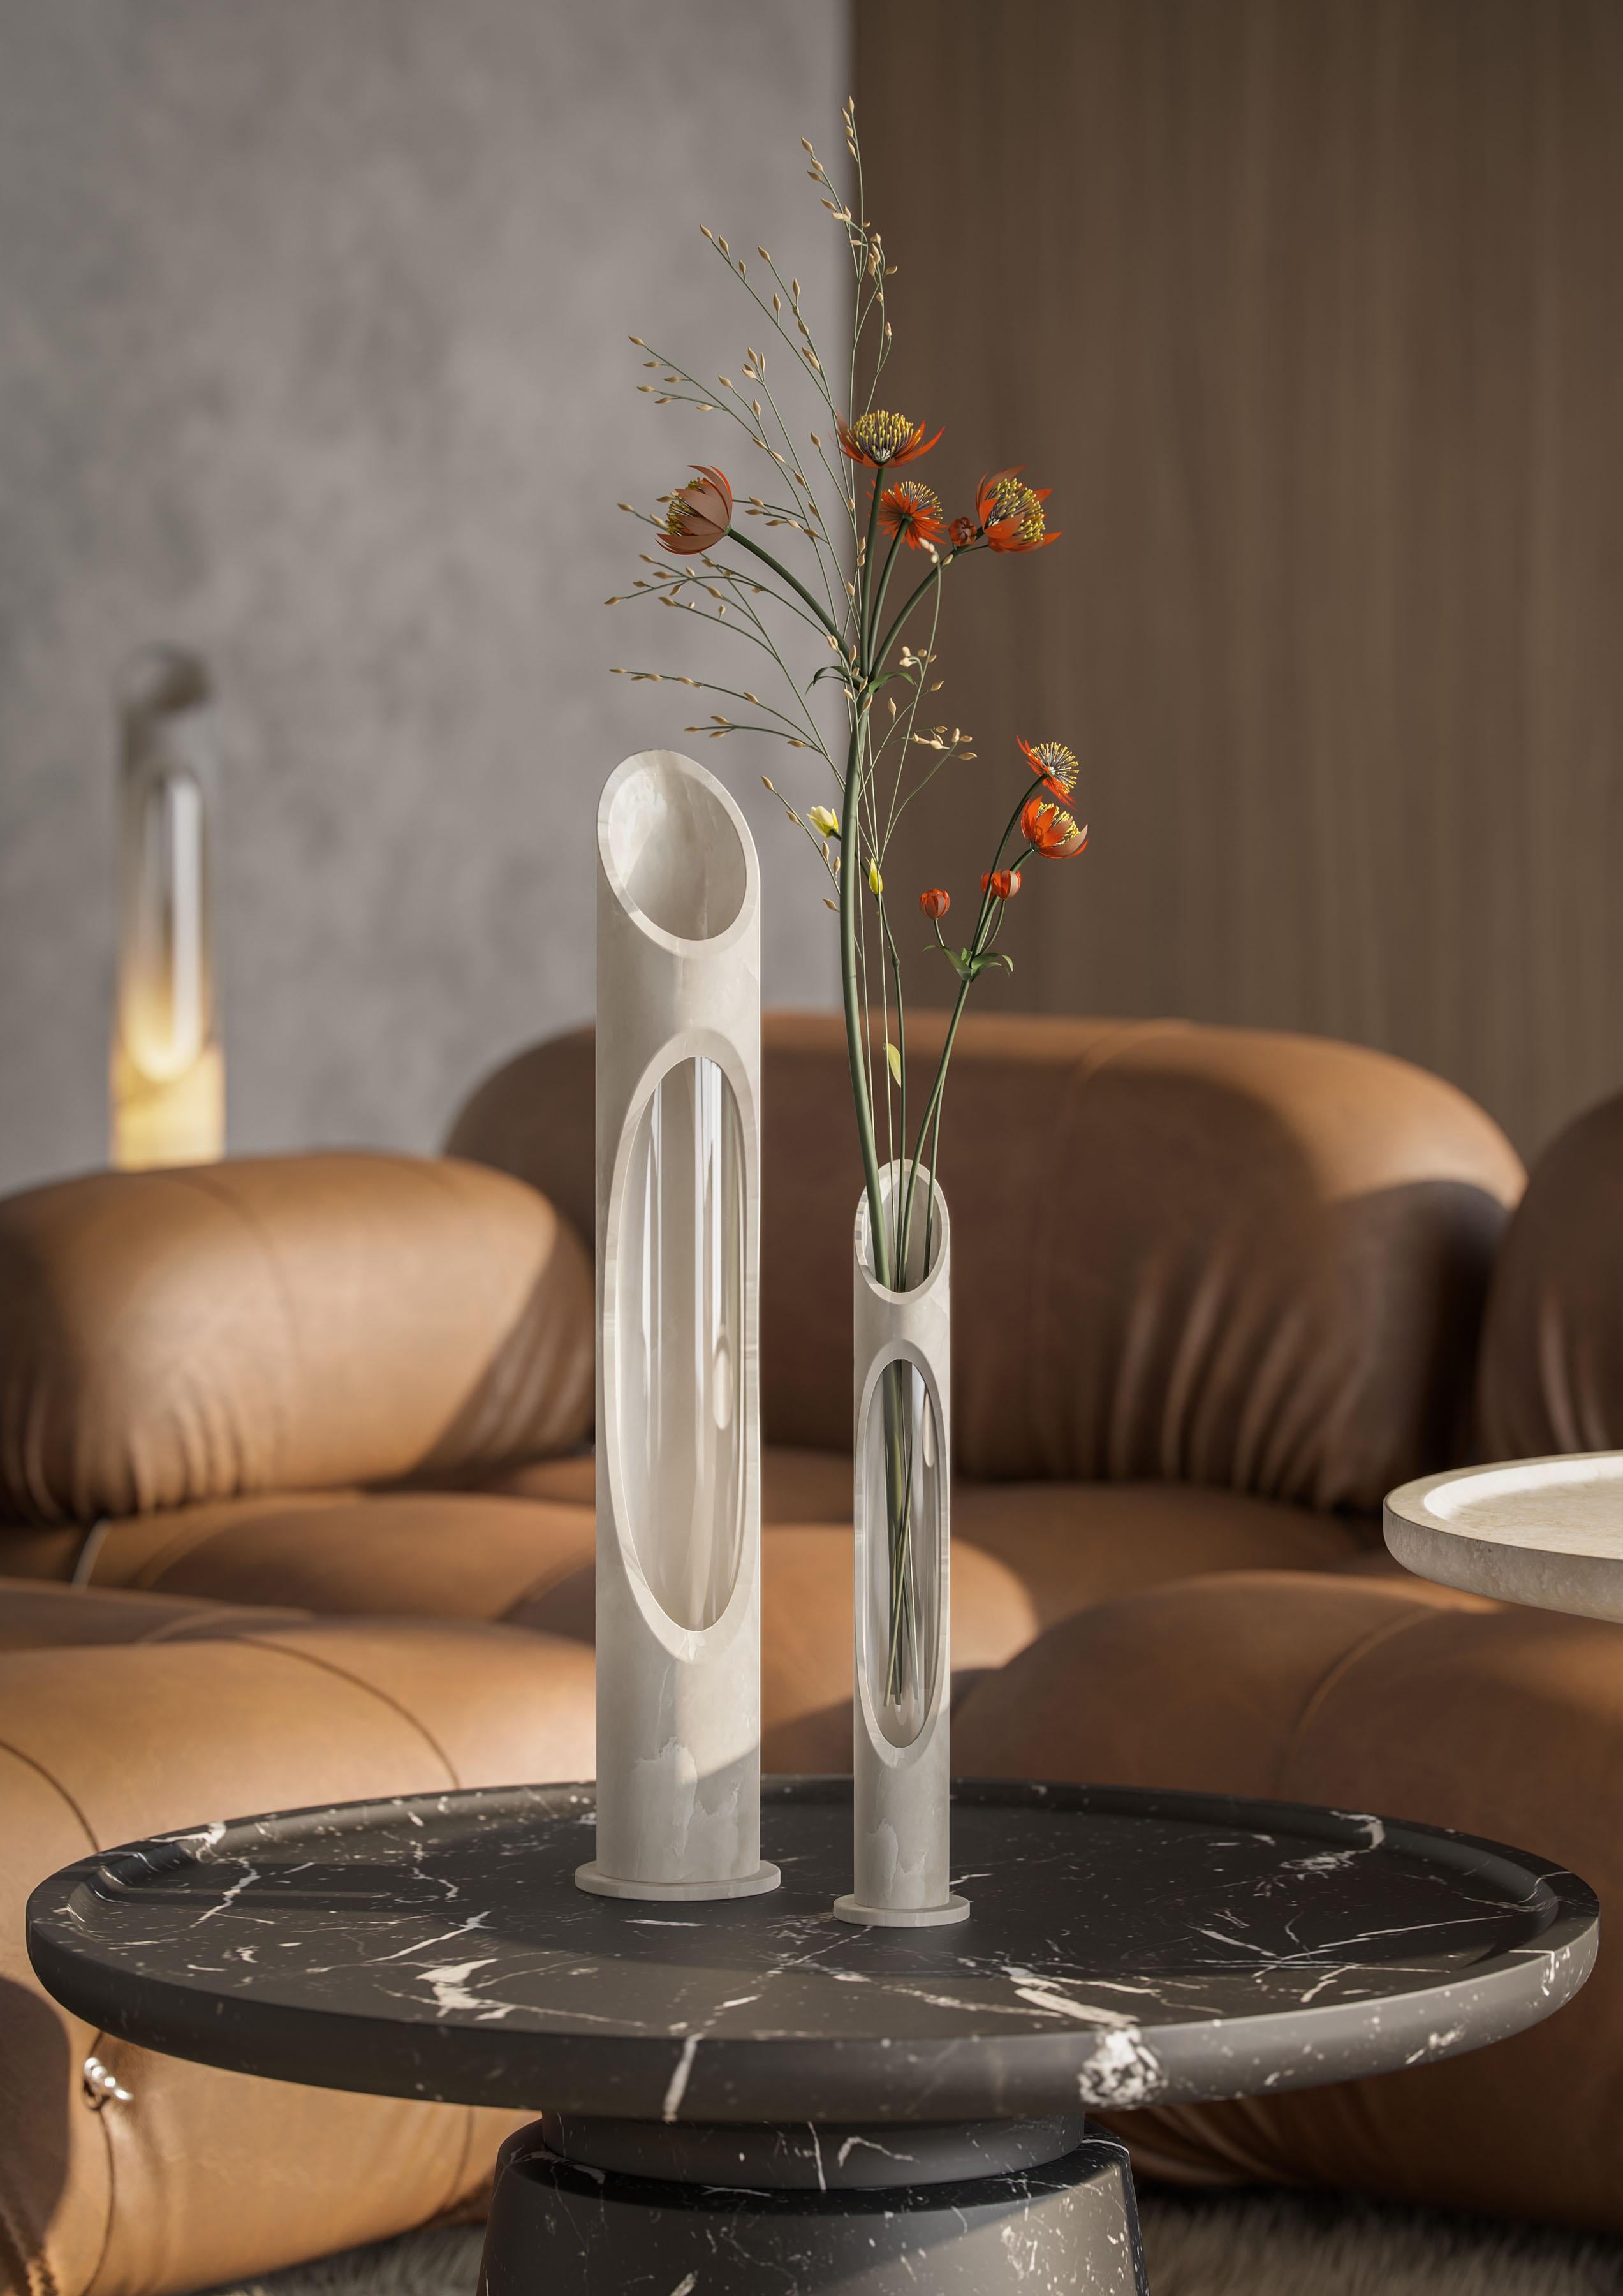 Vase S in White Onyx marble, designed by Jacopo Simonetti.
Available also in Pink Egeo, Black Marquinia, White Arabescato marble and in the L version. 

Armonia Collection: Inspired by the captivating image that two contrasting elements can